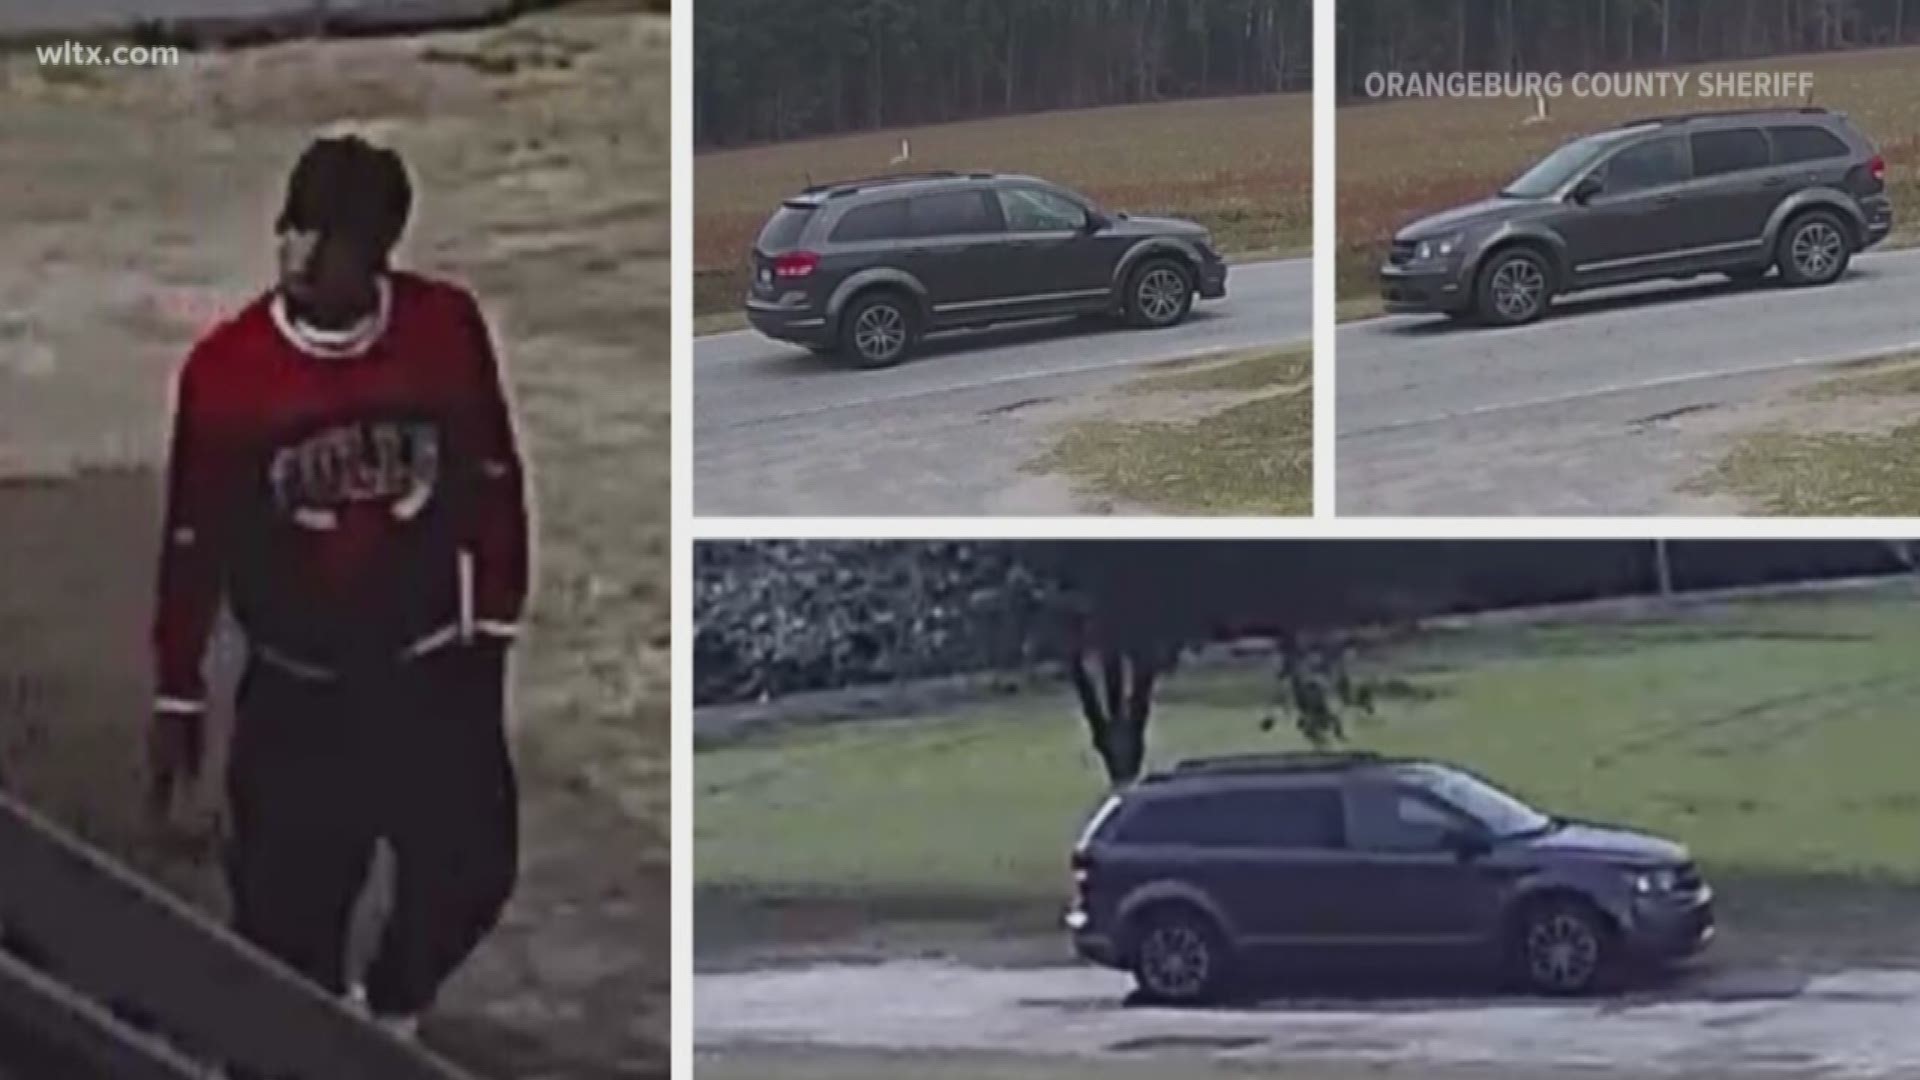 Orangeburg County Deputies are looking for at least one suspect that may be involved in a series of burglaries in the eastern part of the county.